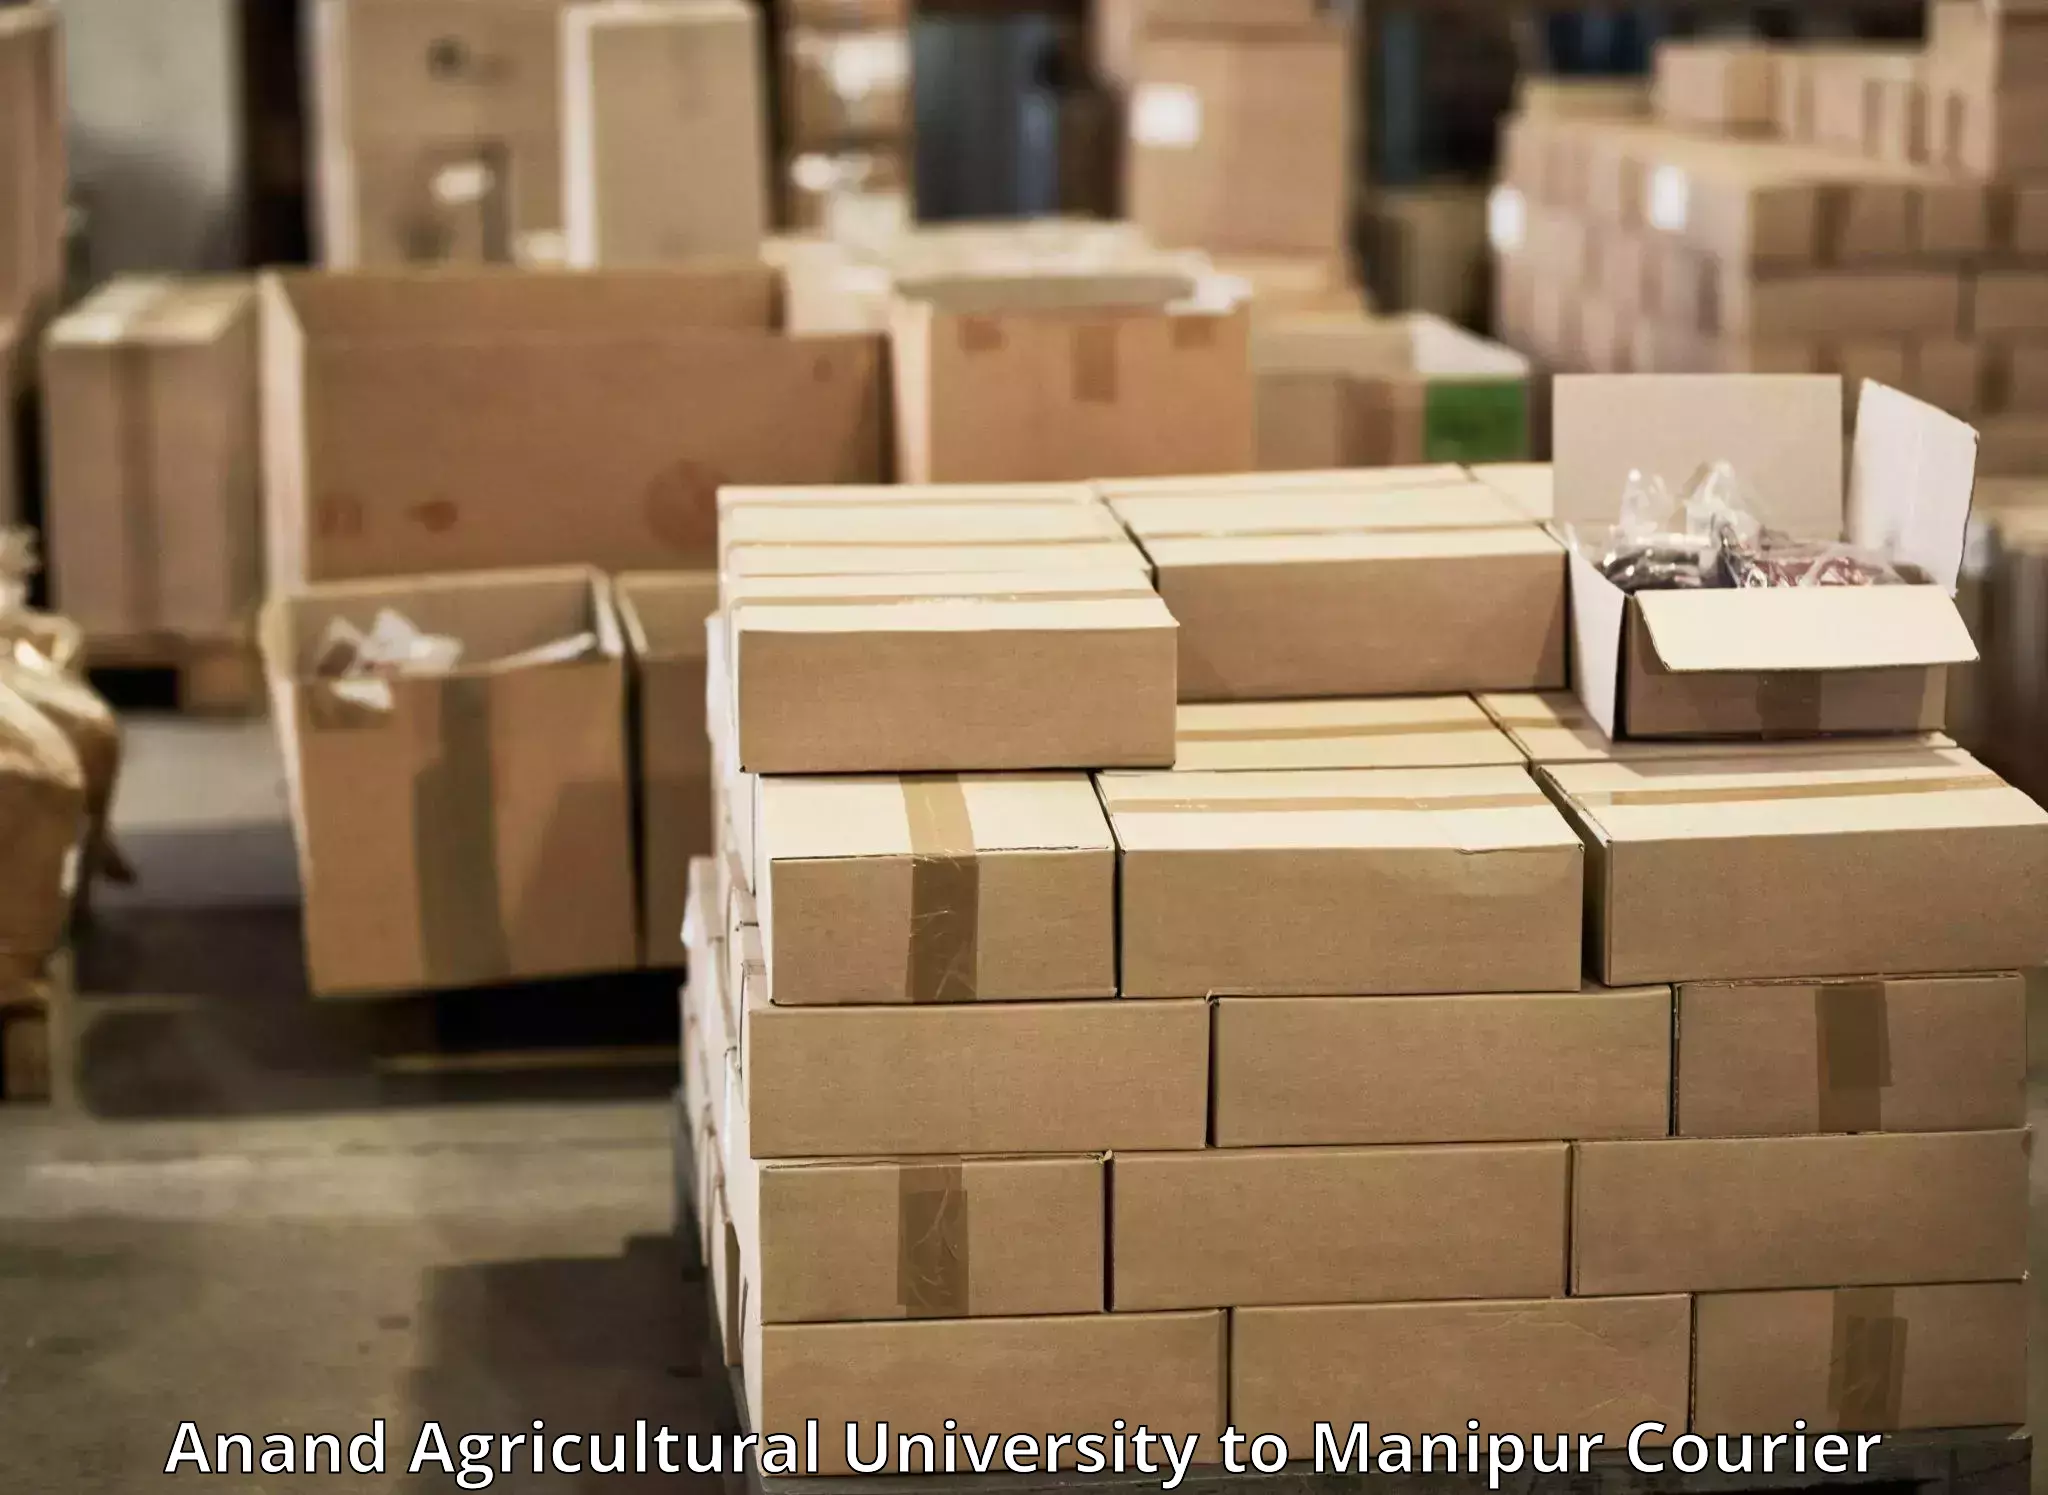 Express mail service Anand Agricultural University to Tamenglong